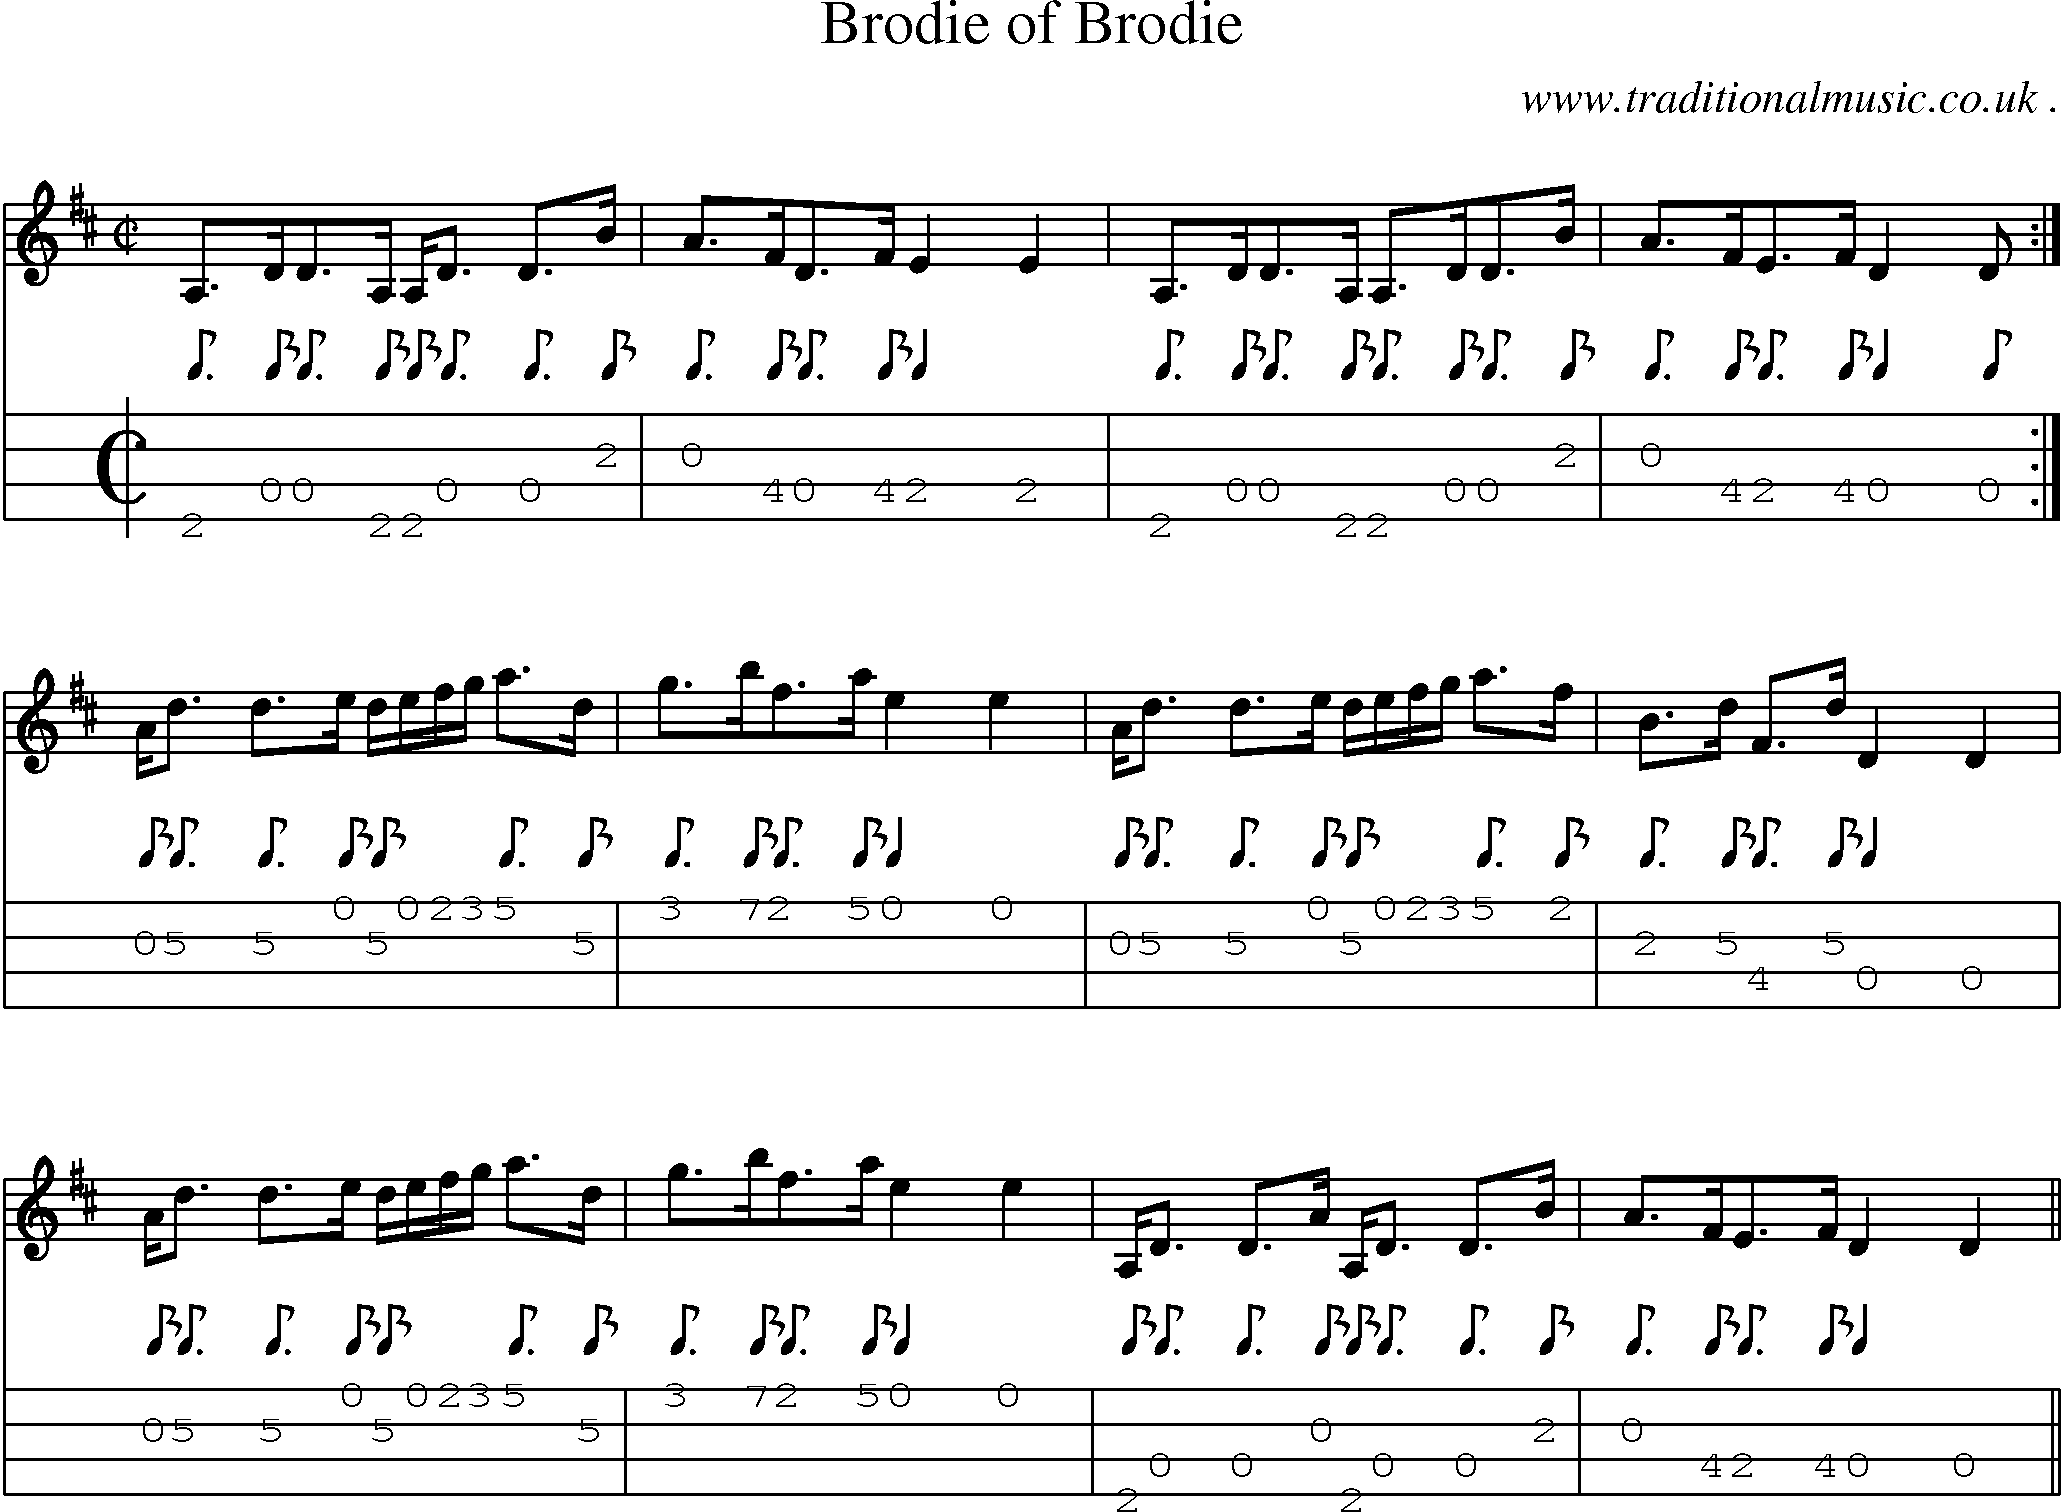 Sheet-music  score, Chords and Mandolin Tabs for Brodie Of Brodie